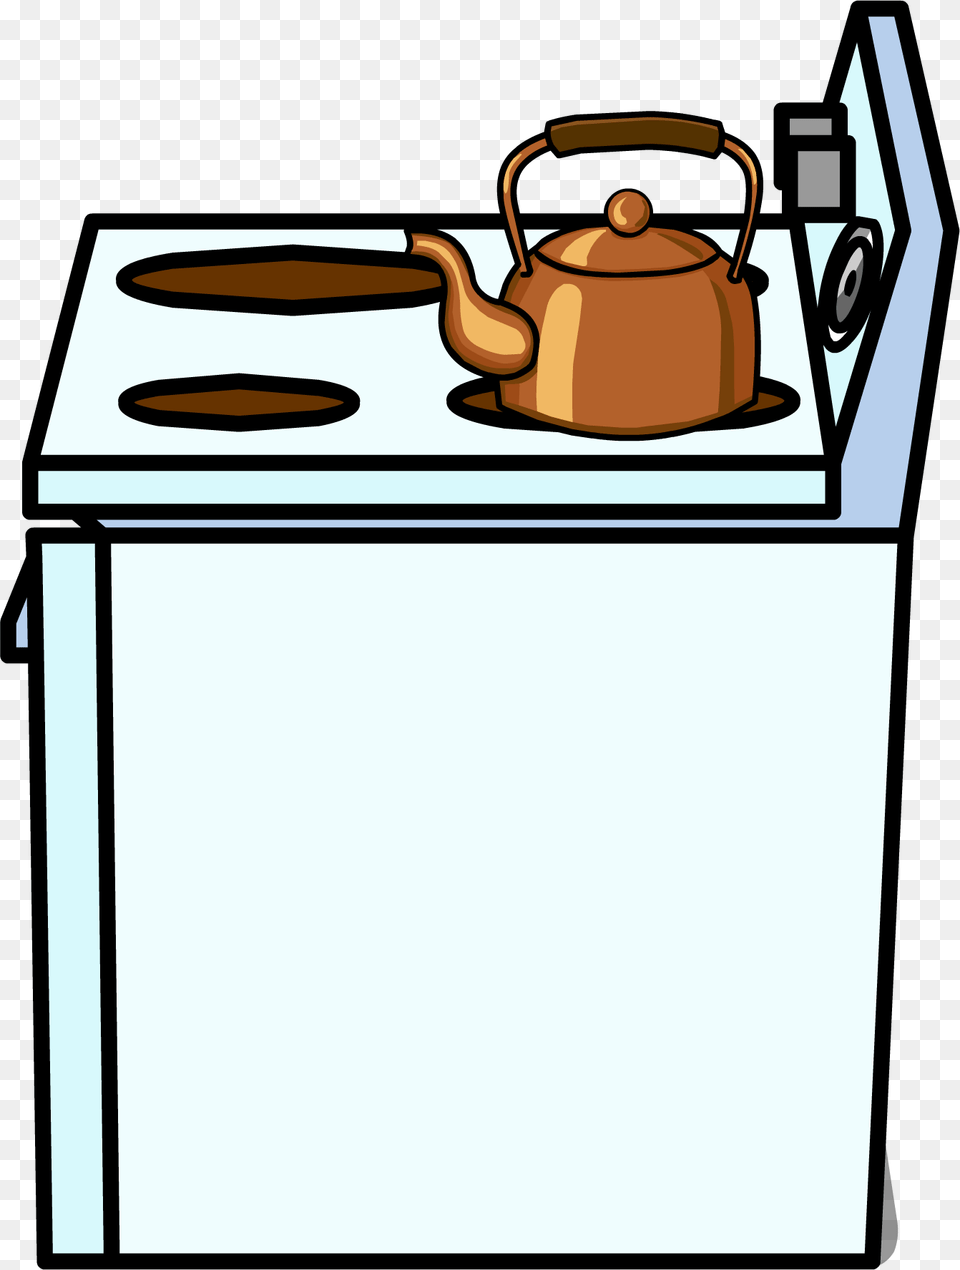 Cookware, Pot, Pottery, Device Png Image